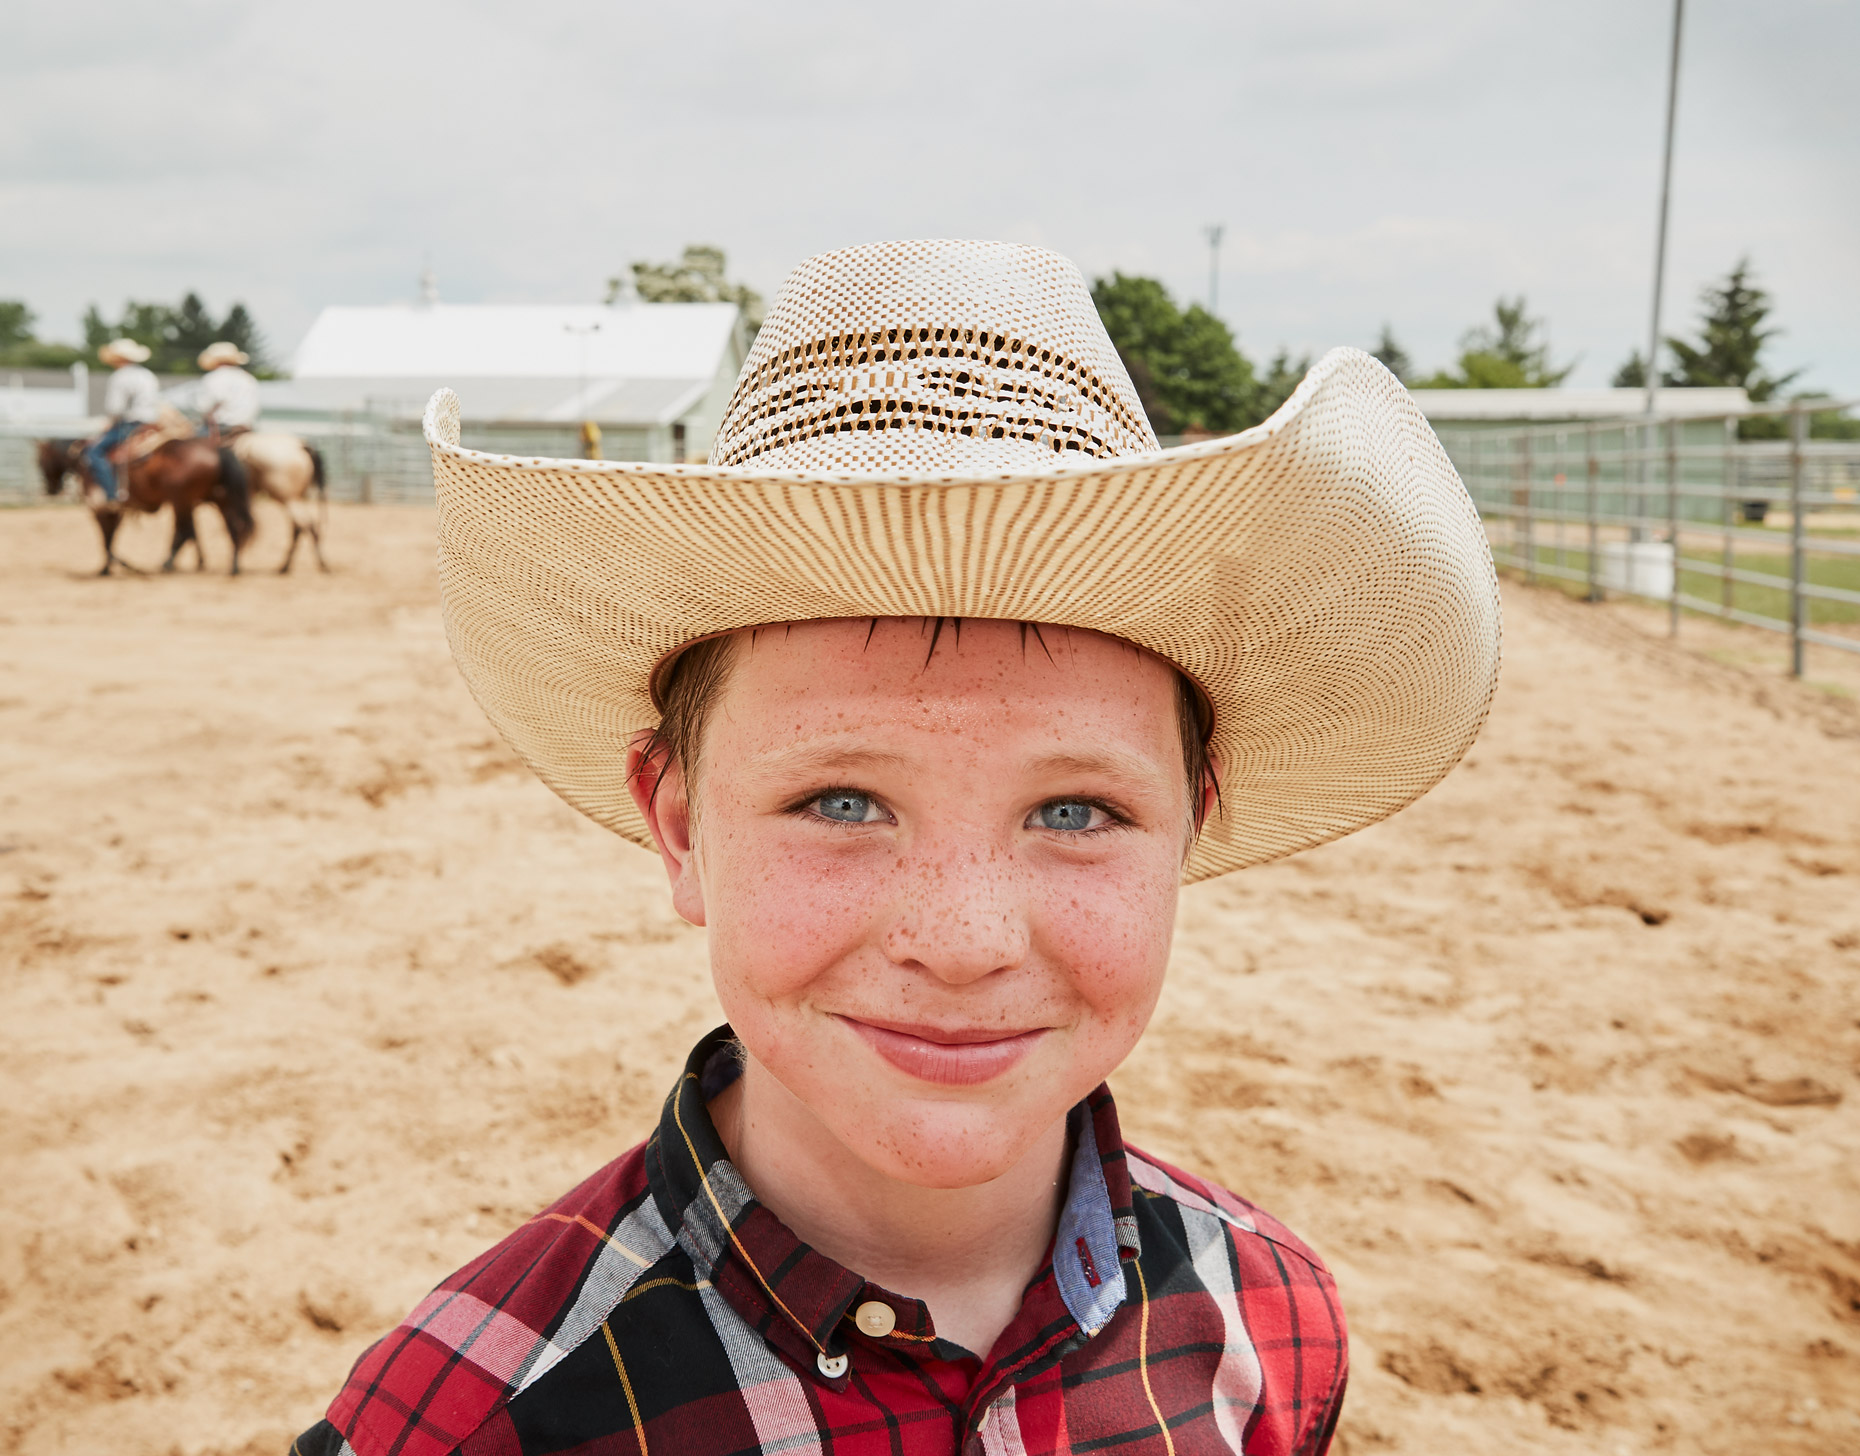 Freckled boy at rodeo | Childrens photography by Saverio Truglia